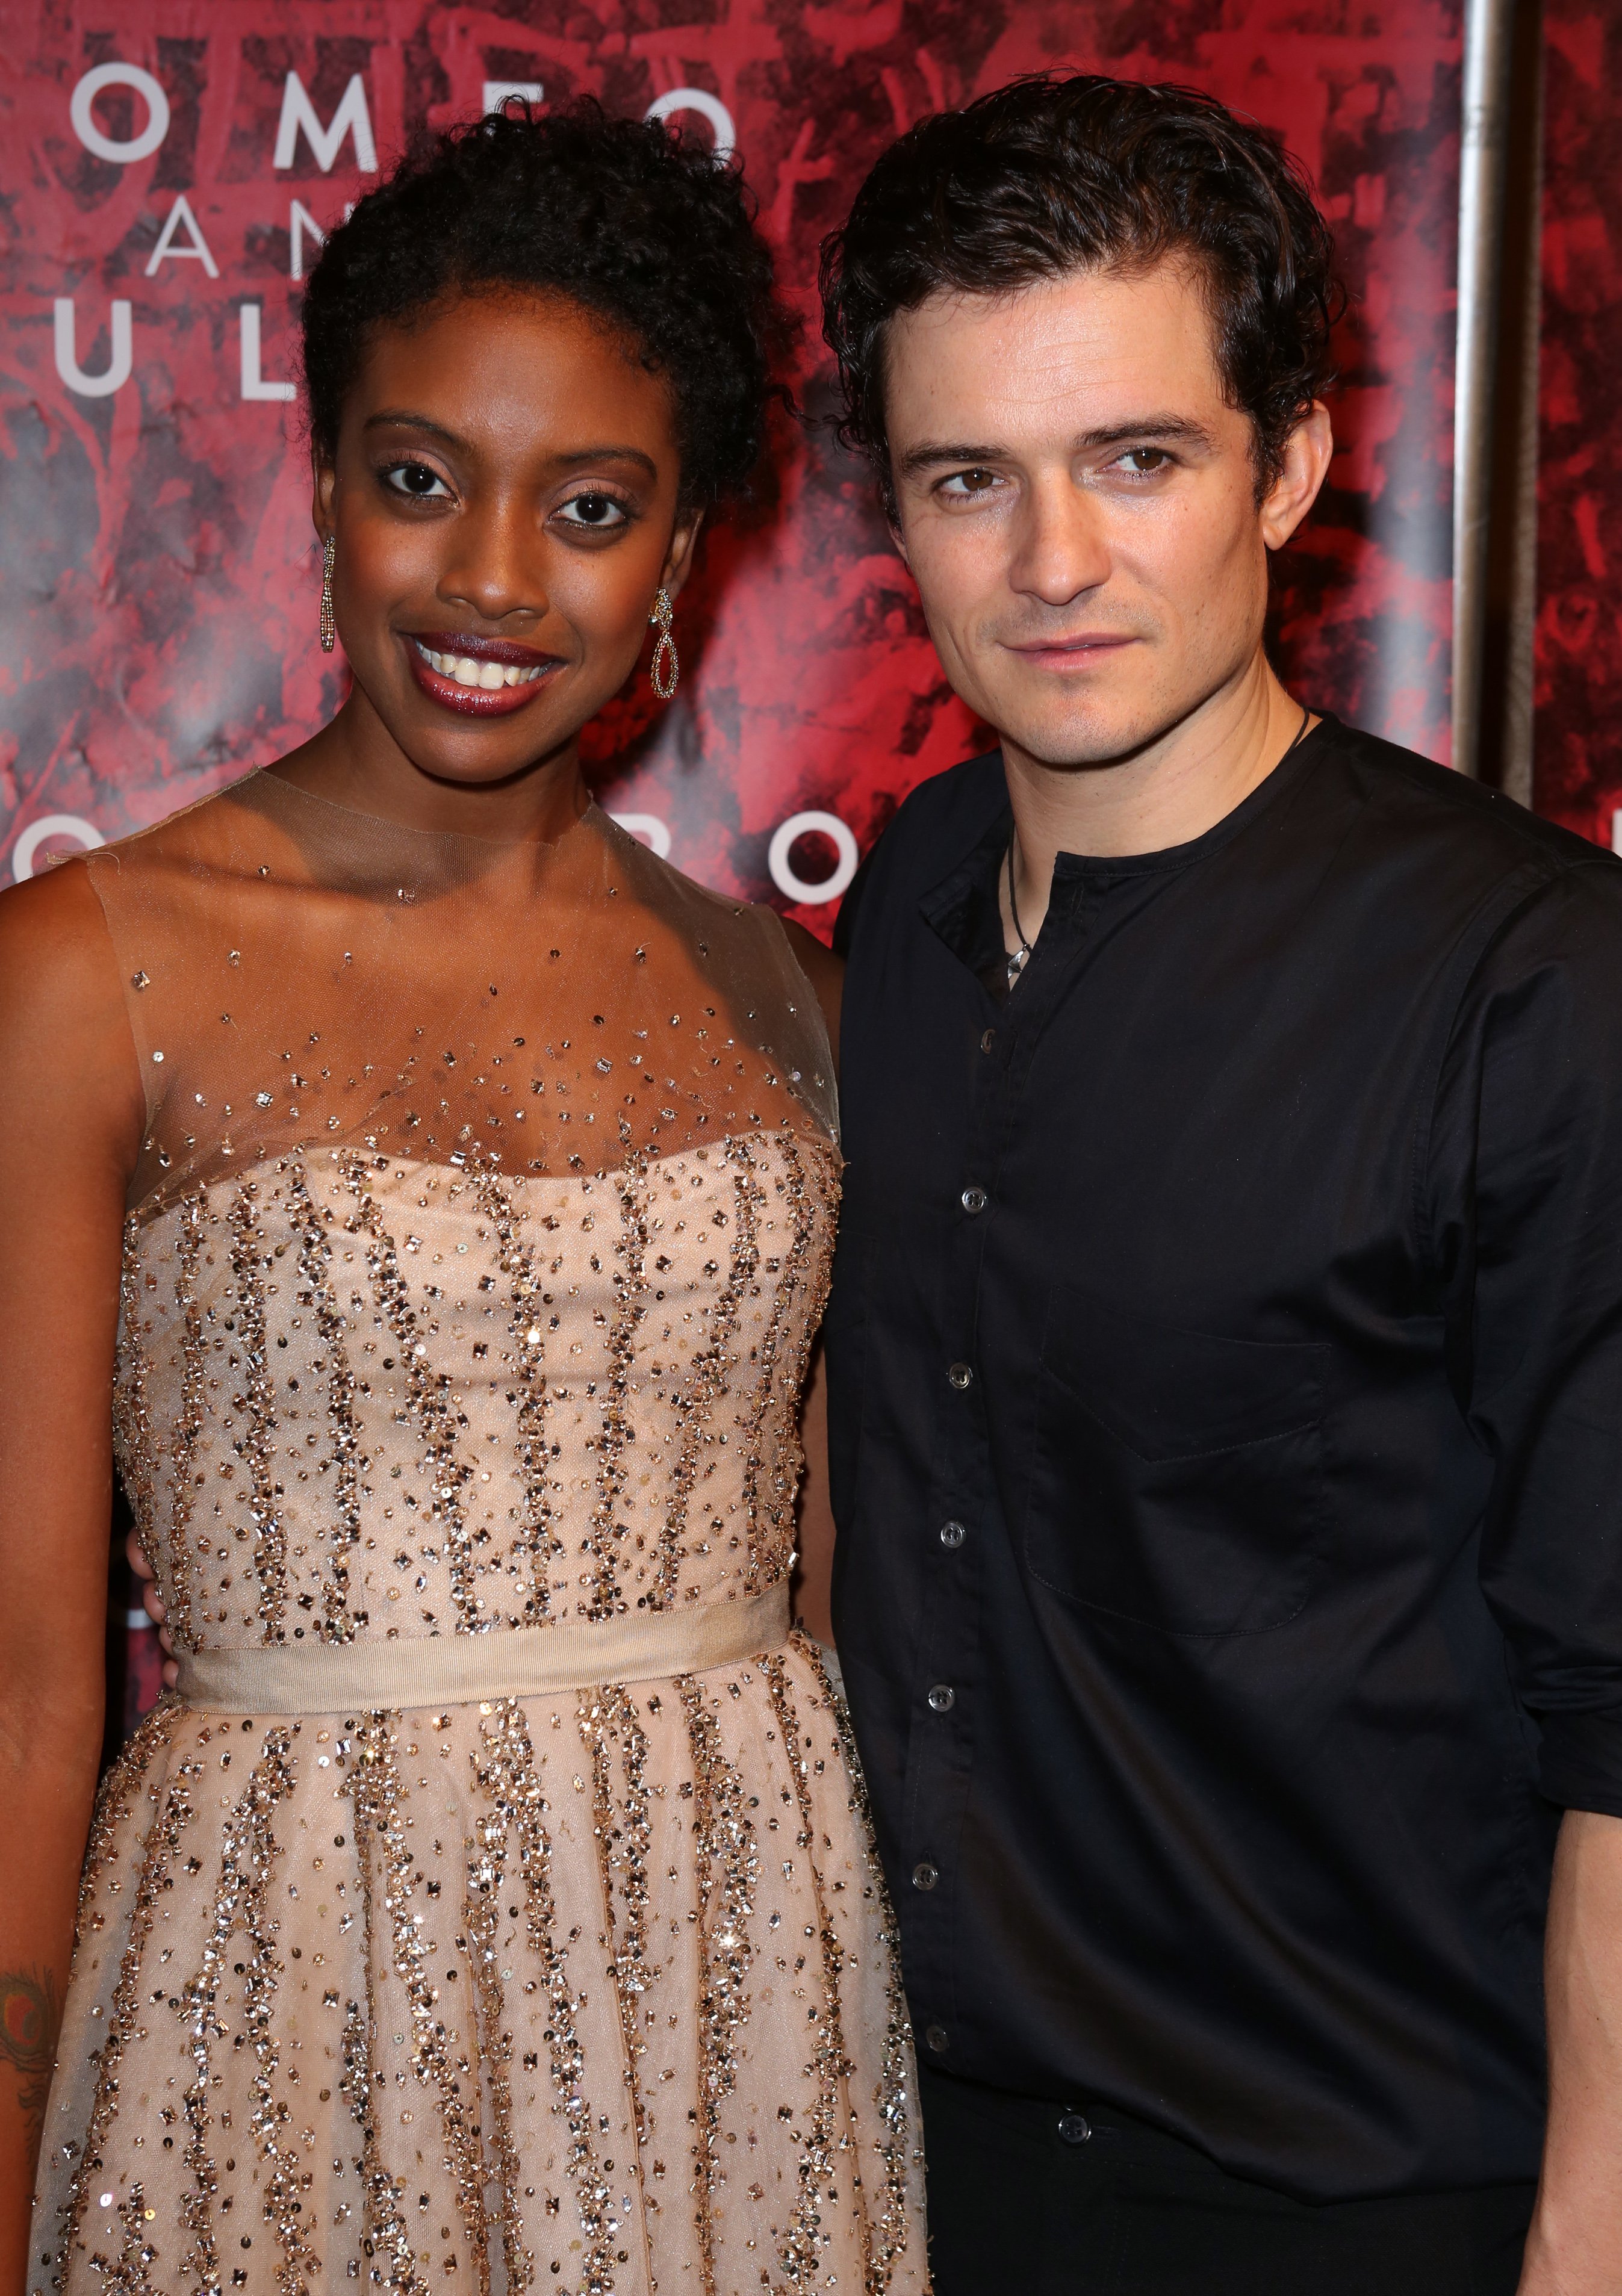 Condola Rashad and Orlando Bloom attend the "Romeo And Juliet" Broadway Opening Night after party at The Edison Ballroom on September 19, 2013, in New York City. | Source: Getty Images